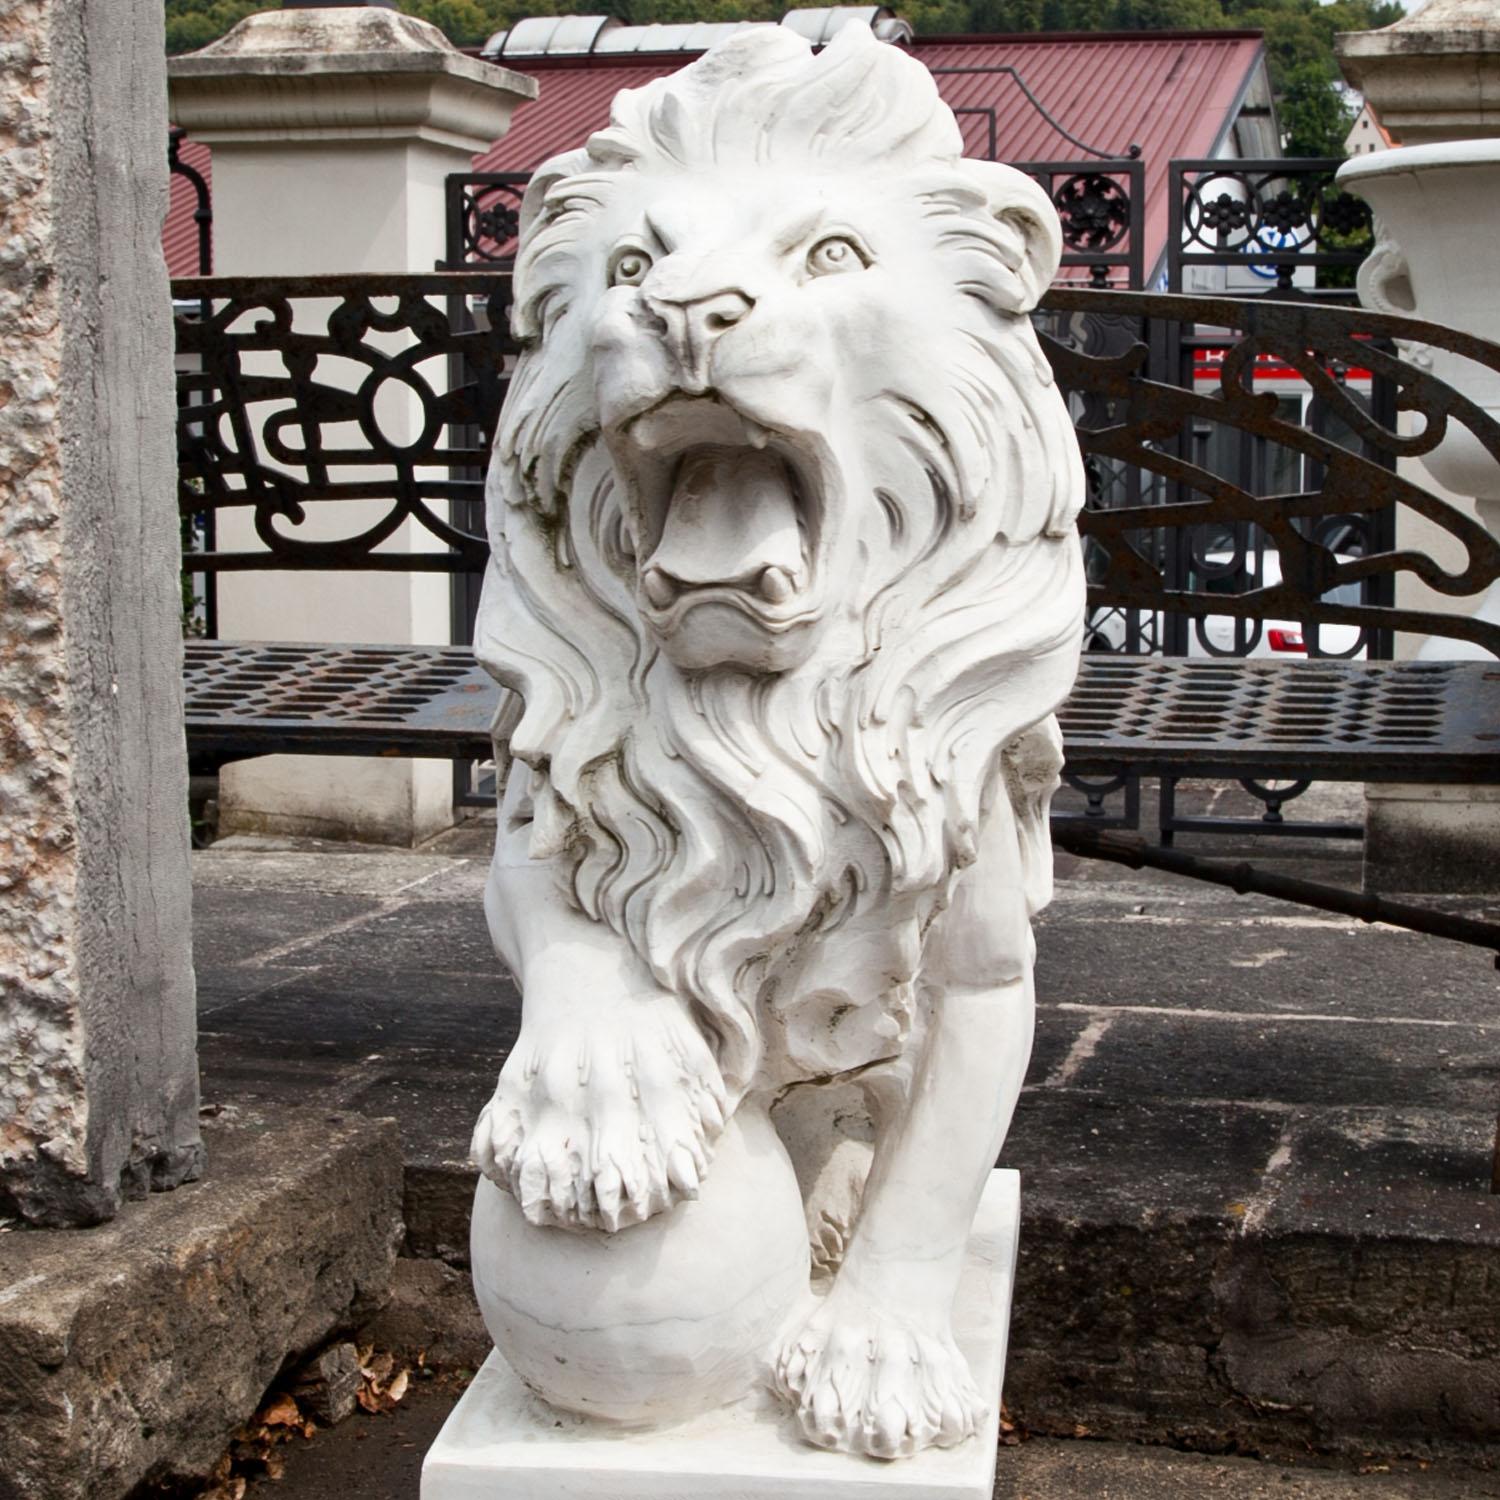 Pair of hand-carved male lions out of marble, standing on square bases. The lions are in a mirrored posture, each one placing his paw on a ball. They are depicted with an expressive mimic, wide-open mauls and a flowing mane.